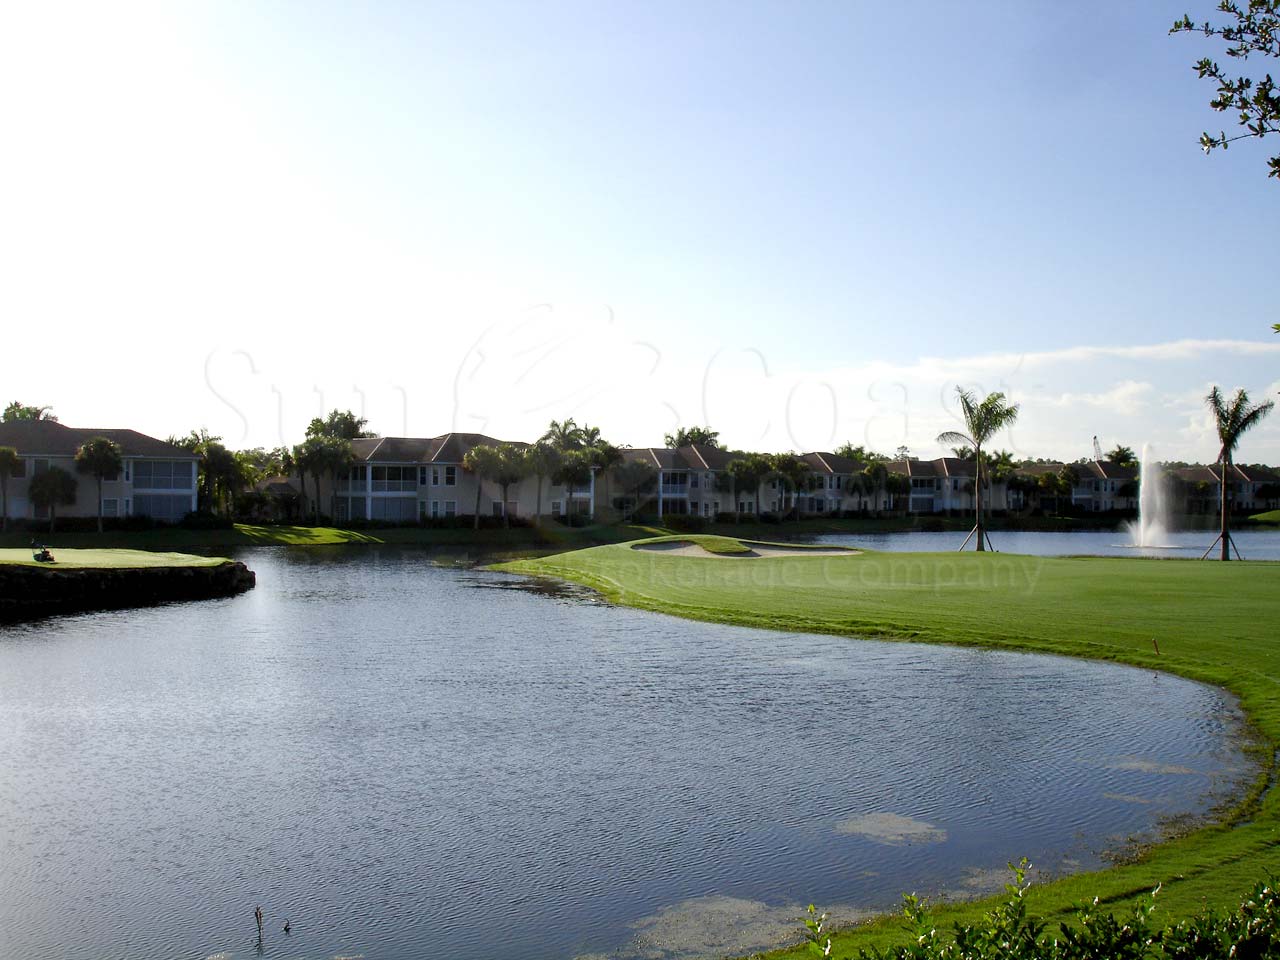 Juliana Village waterfront coach homes with tile roofs and attached garages.